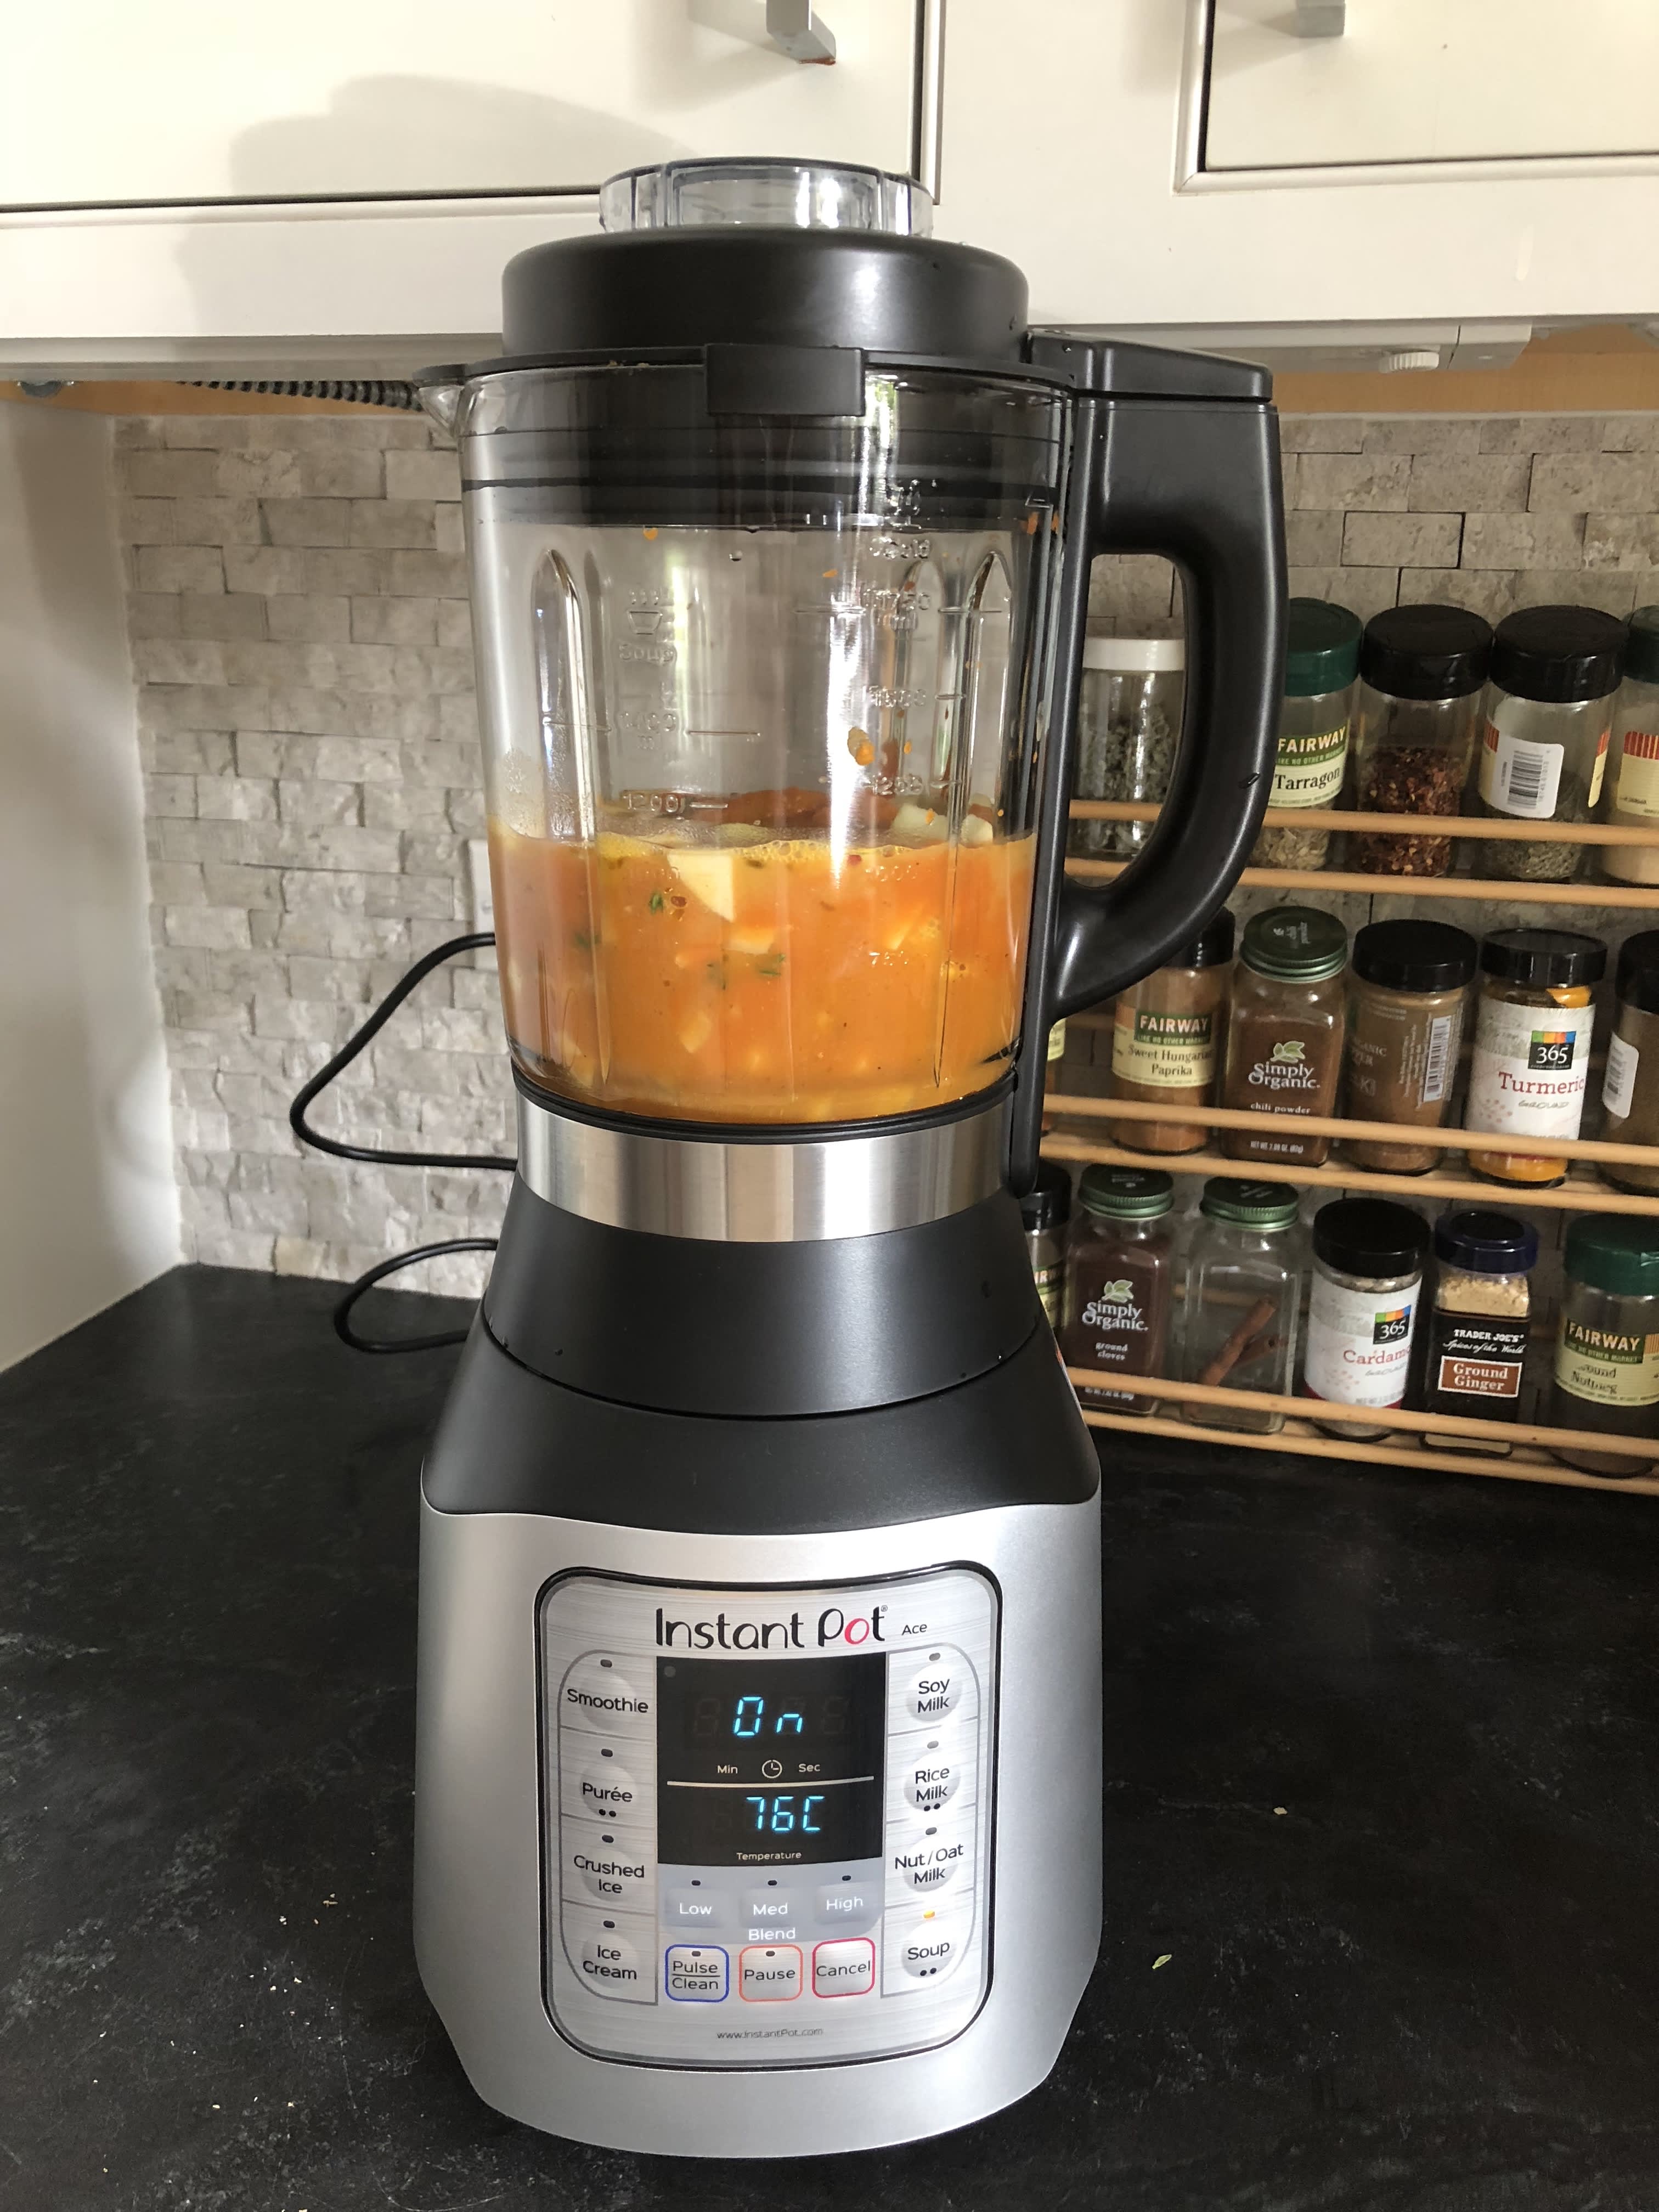 Instant Pot Ace review: Instant Pot cooks up a successful blender with the  Ace - CNET